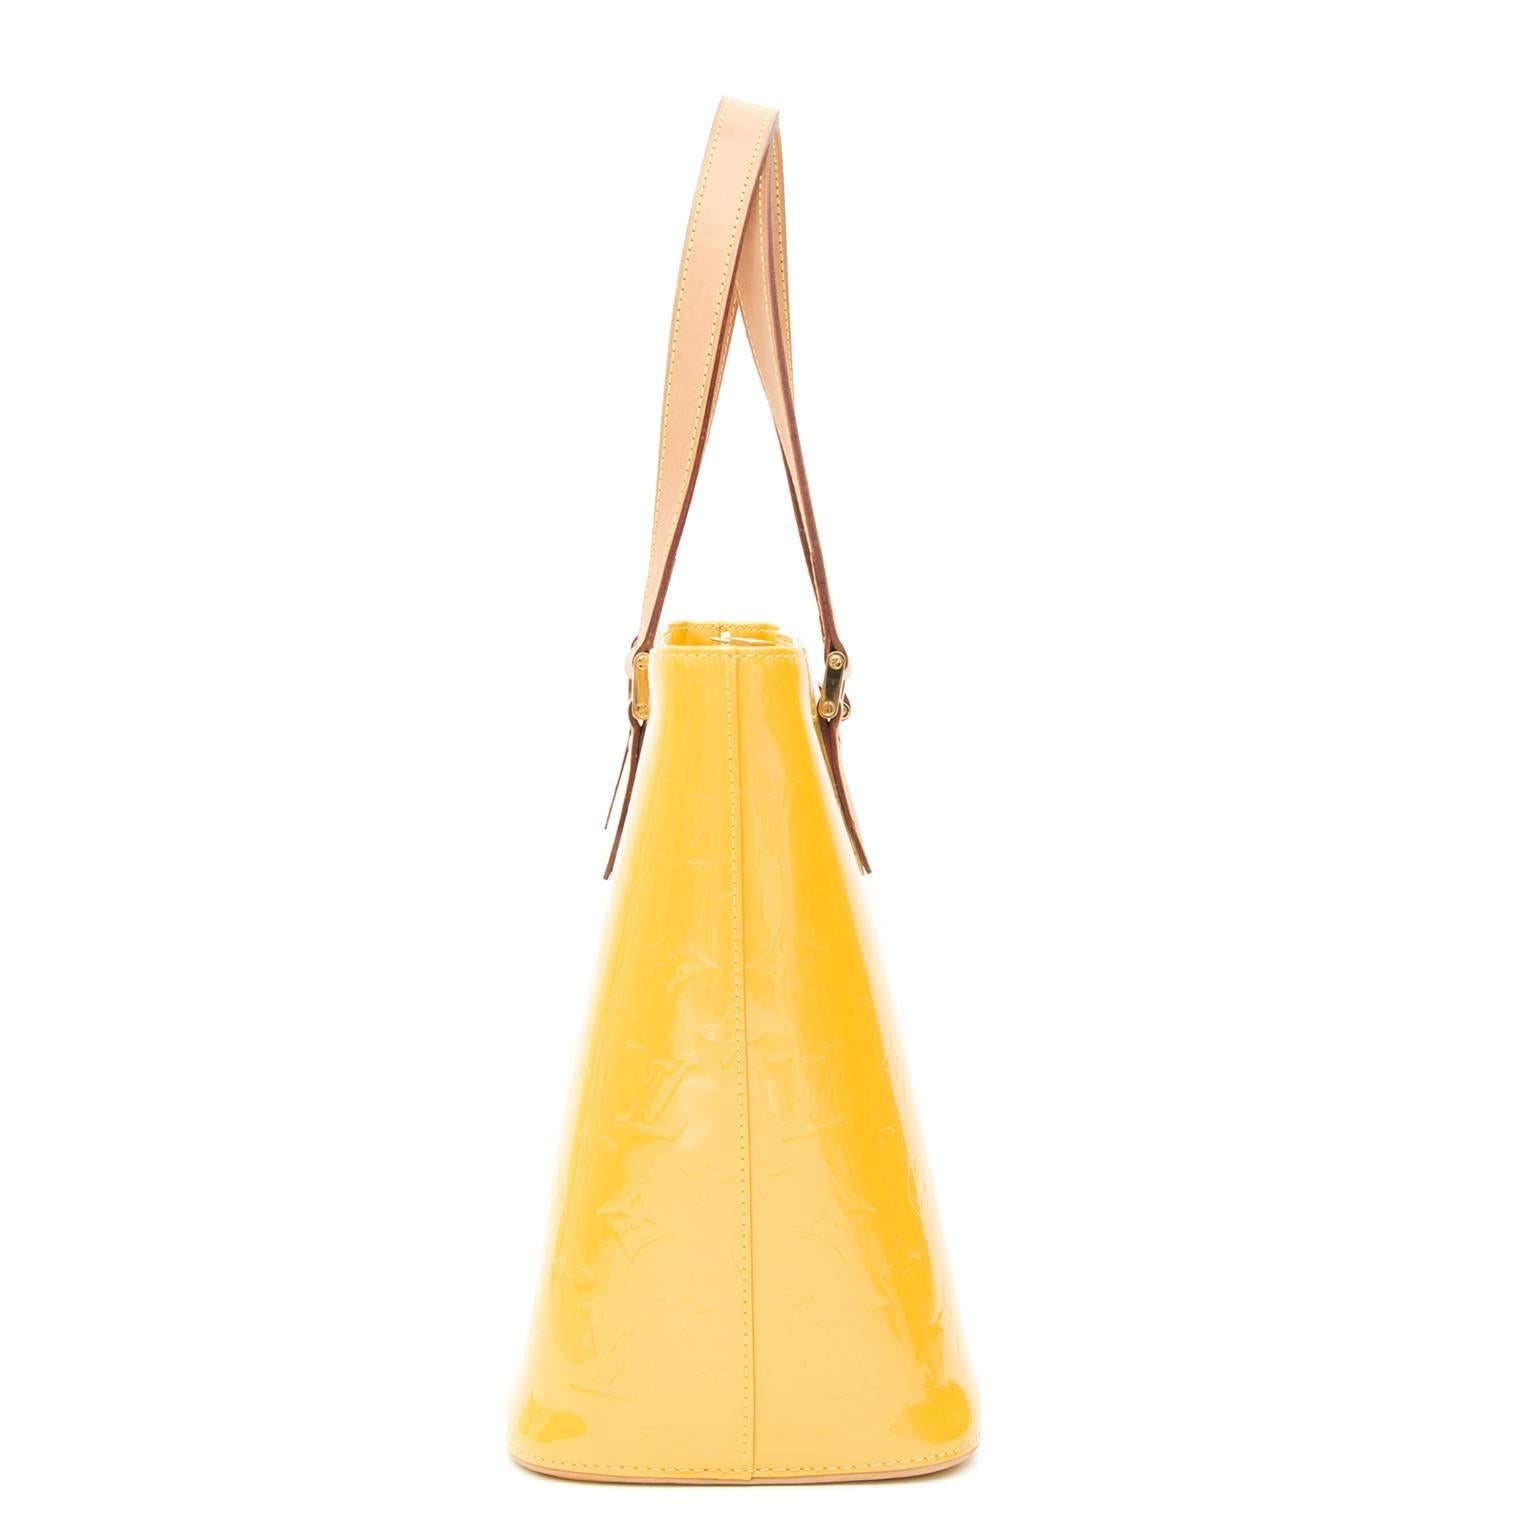 Louis Vuitton Houston Yellow Monogram Vernis Tote

Give any outfit an updated look by adding this bright yellow Louis vuitton tote.

The Houston tote fits all your daily essentials. Patent leather 'vernis' finish with embossed